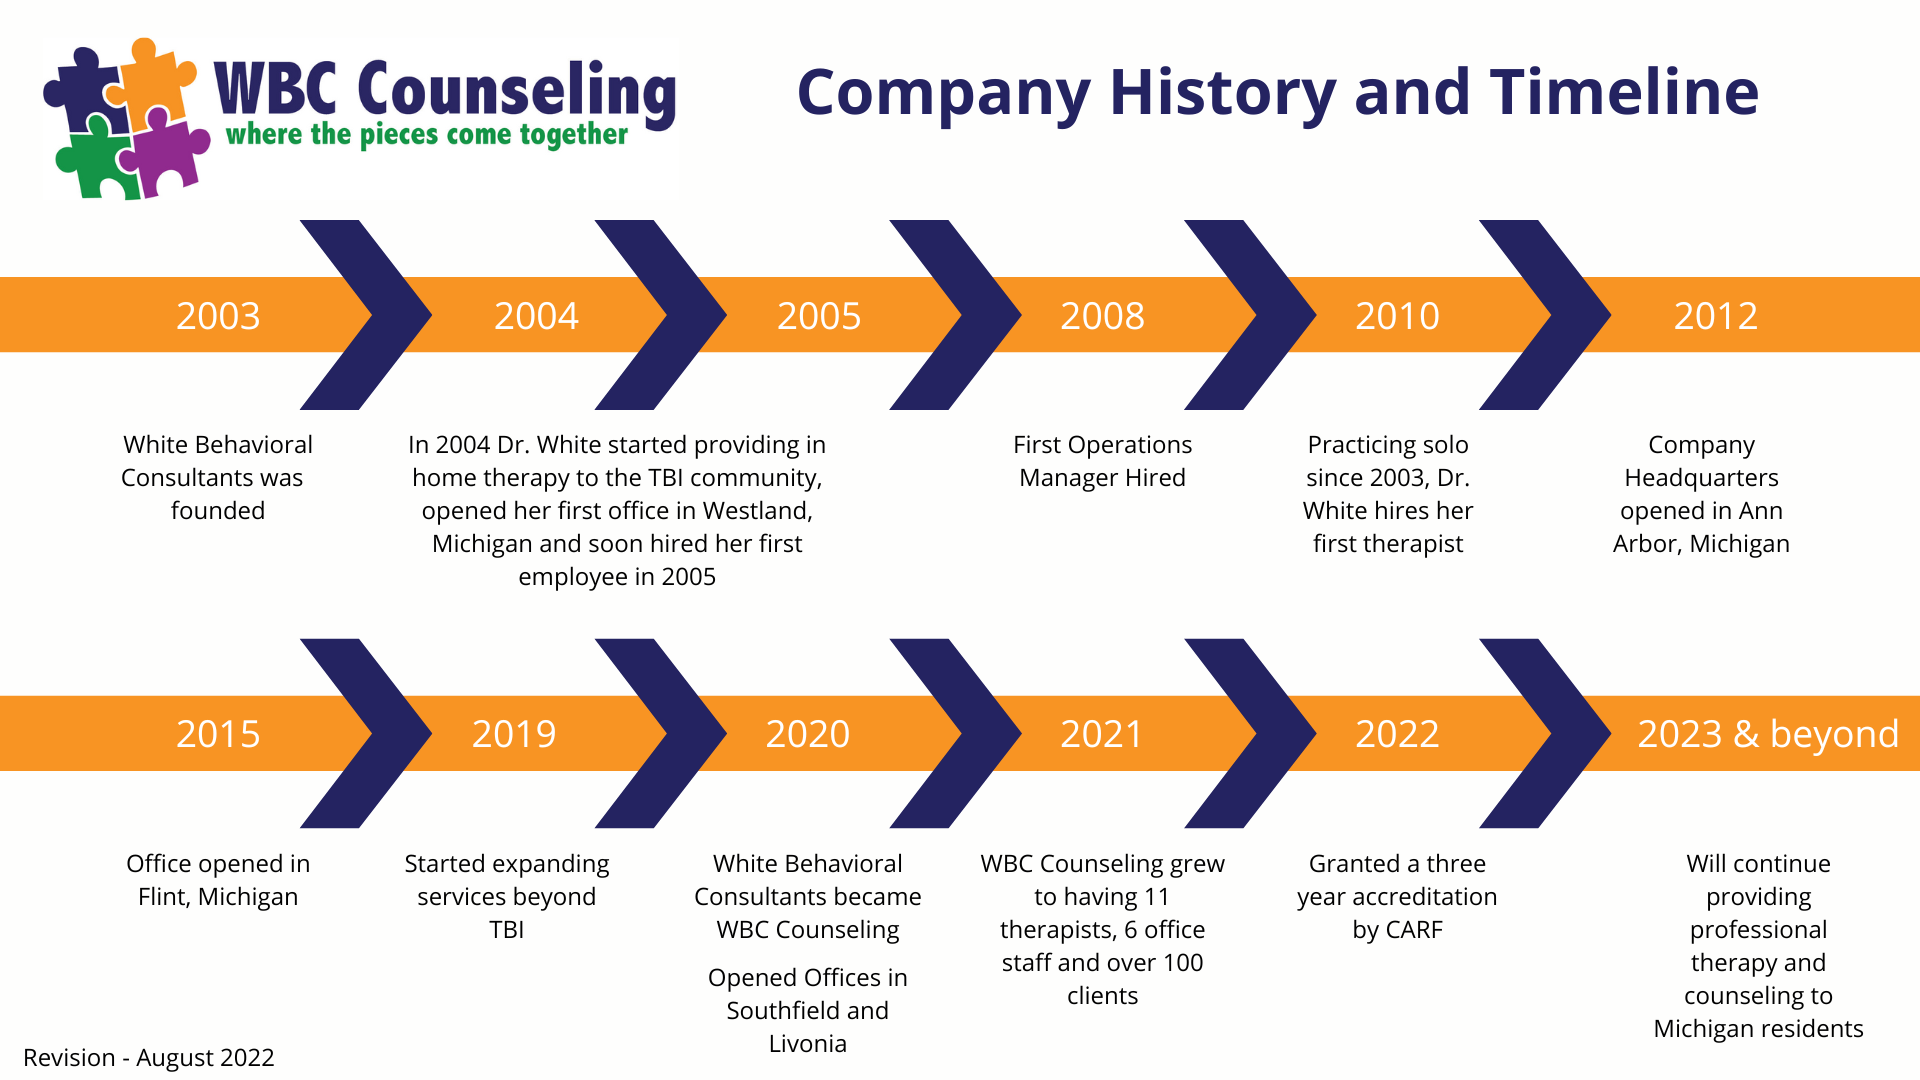 A company history and timeline chart of WBC Counseling